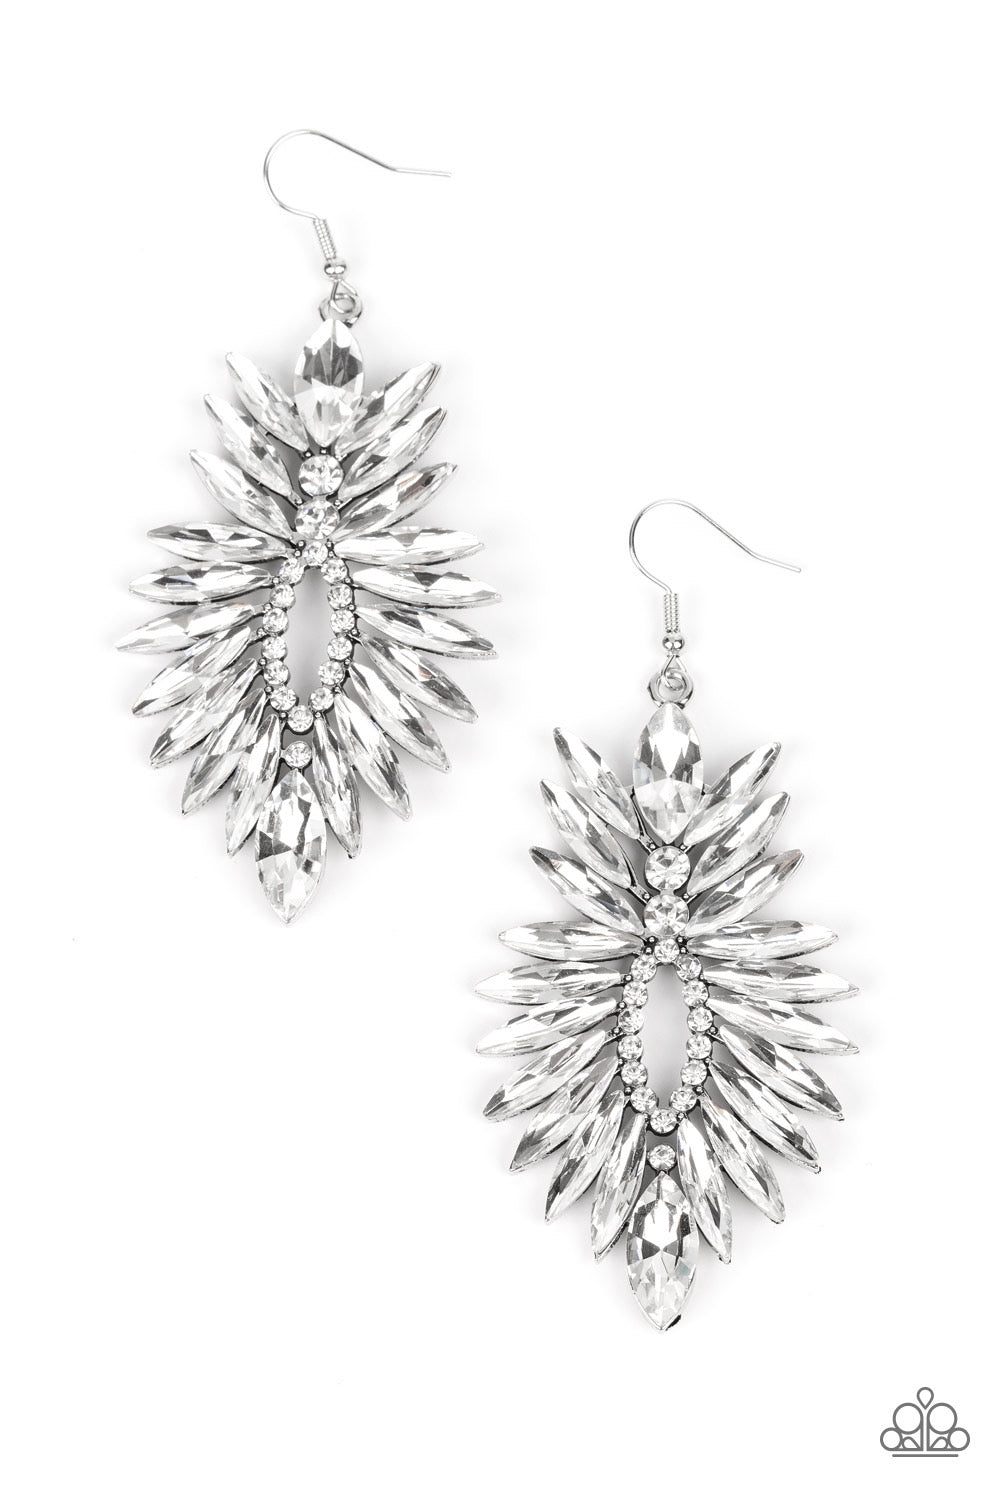 Paparazzi Turn up the Luxe - White Earrings - Bling Jewelry Paparazzi jewelry images